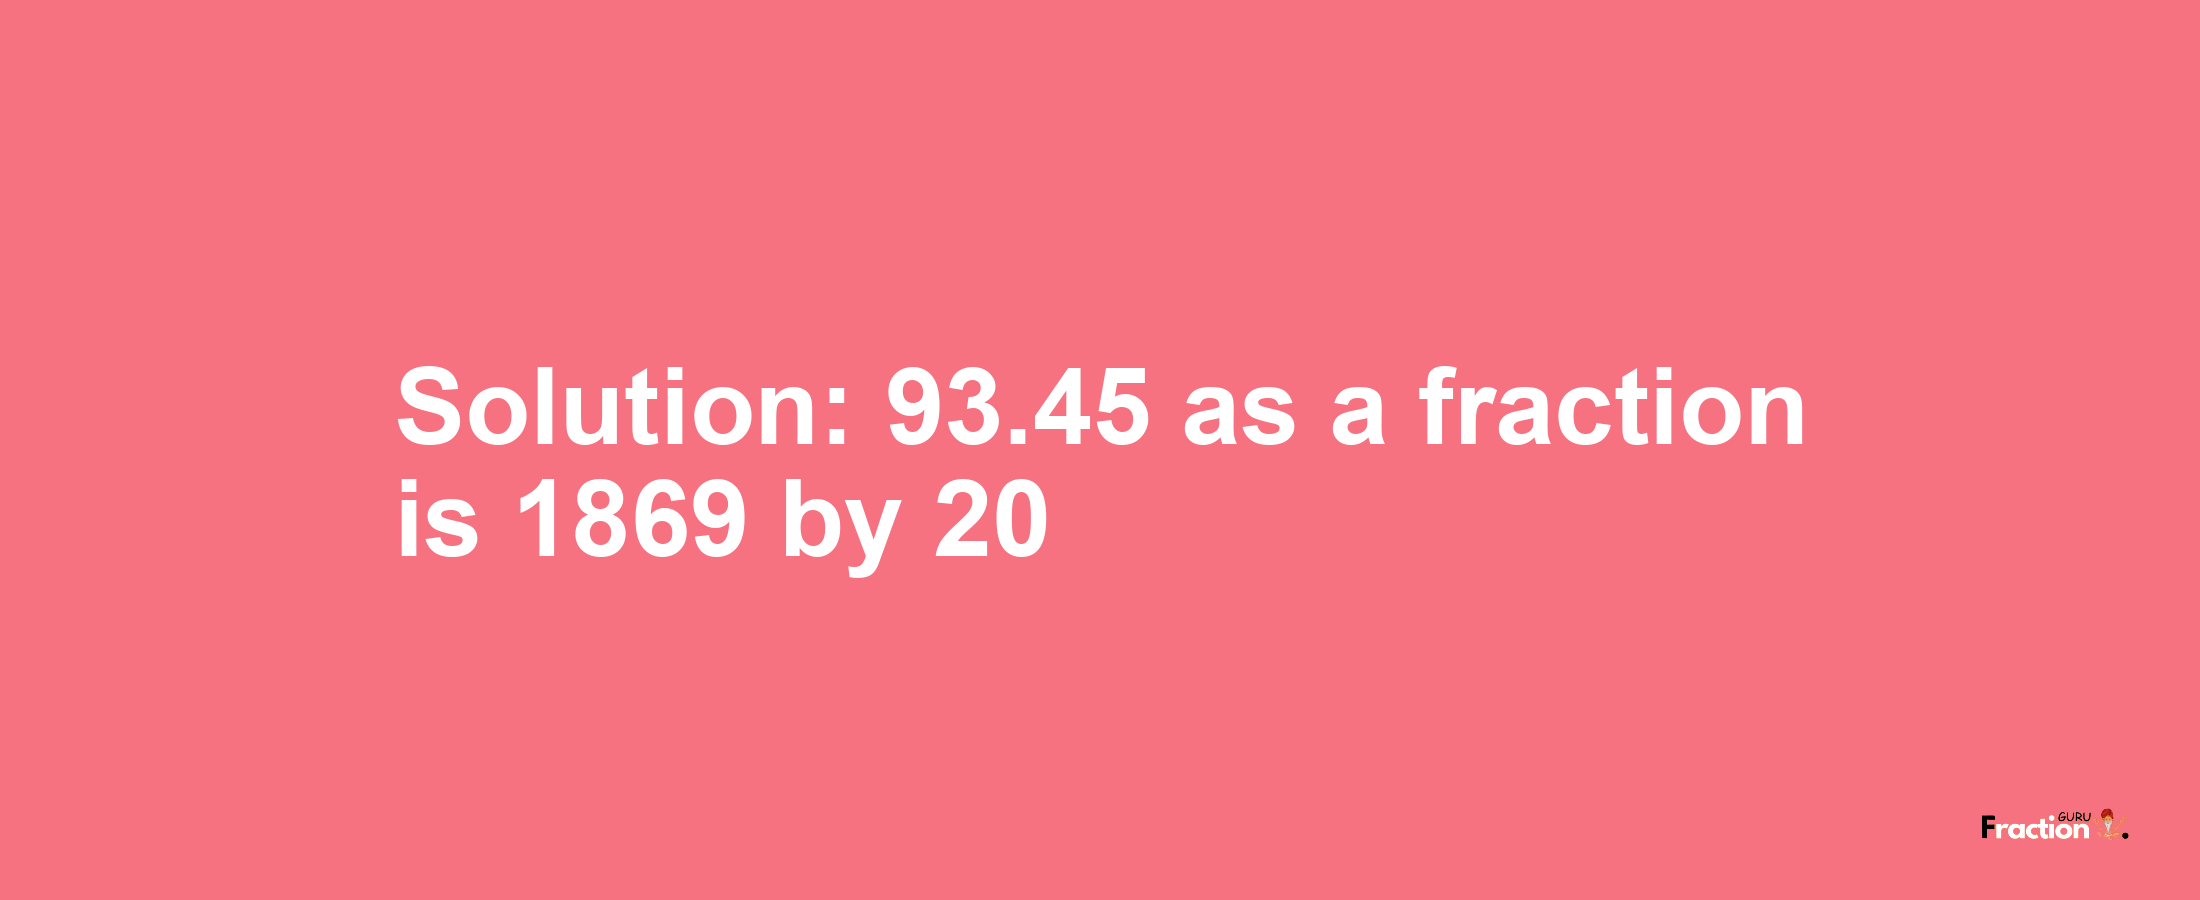 Solution:93.45 as a fraction is 1869/20